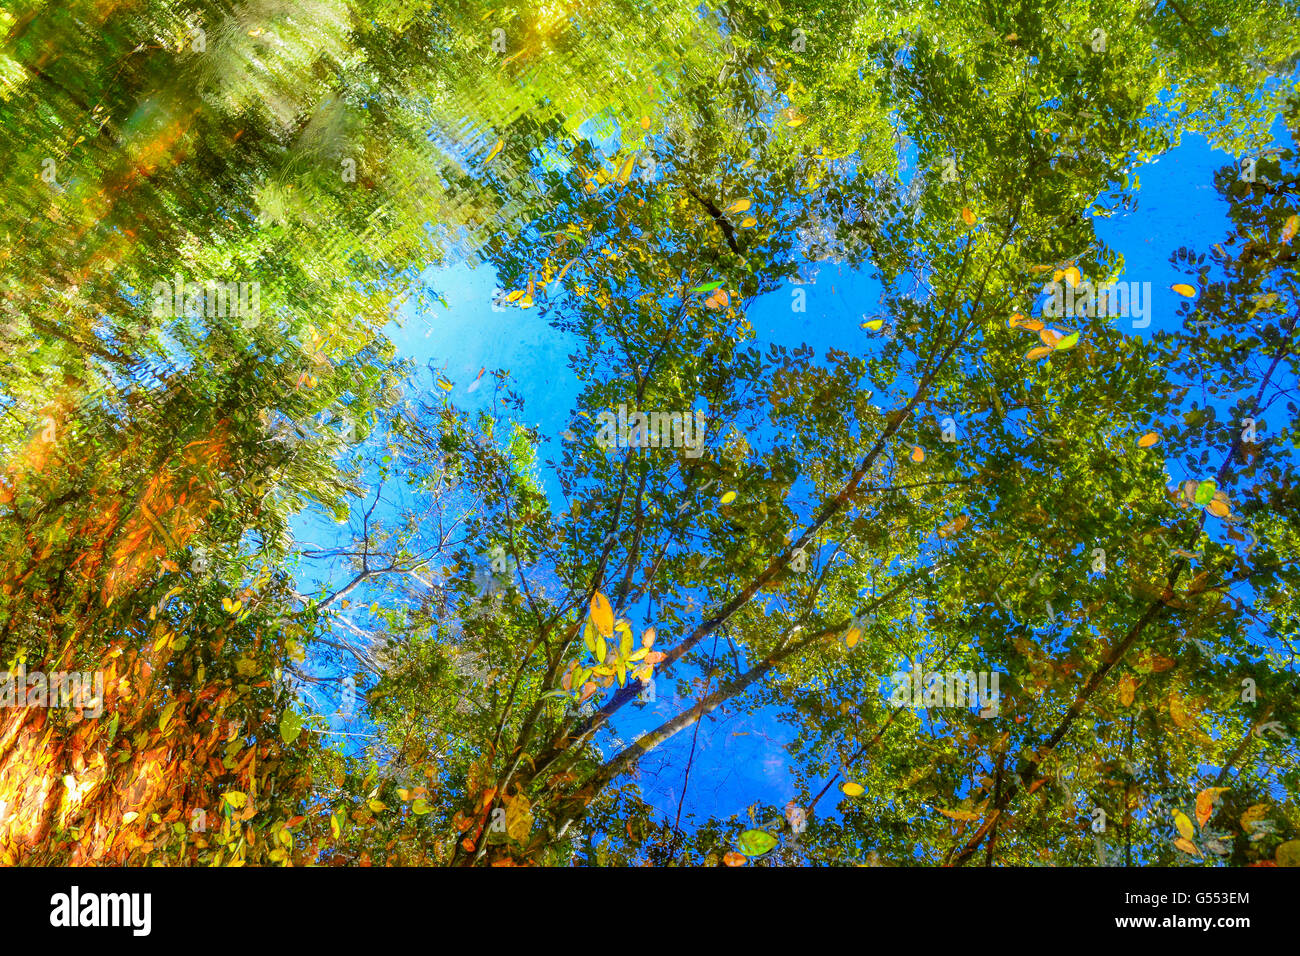 Reflection of trees in water on a sunny day Stock Photo